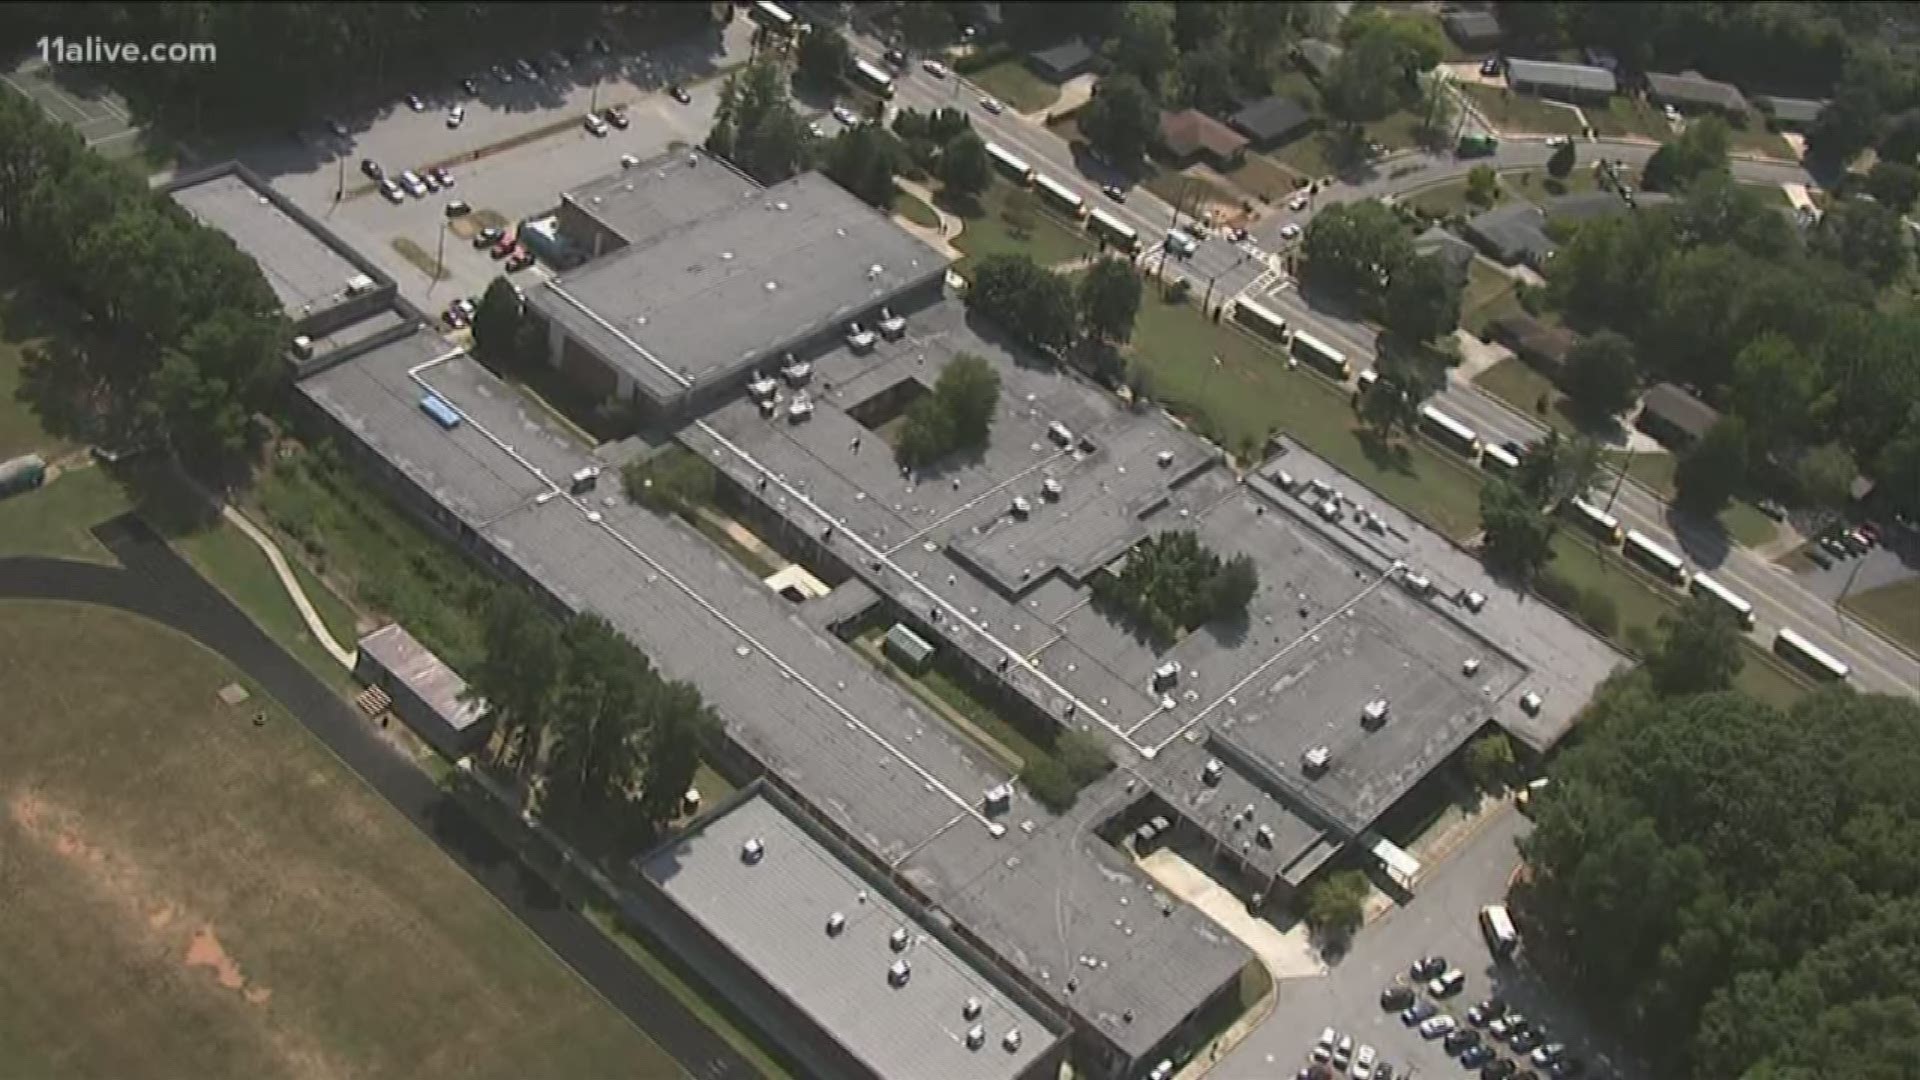 School officials say they searched one student after administrators believed they smelled like marijuana.